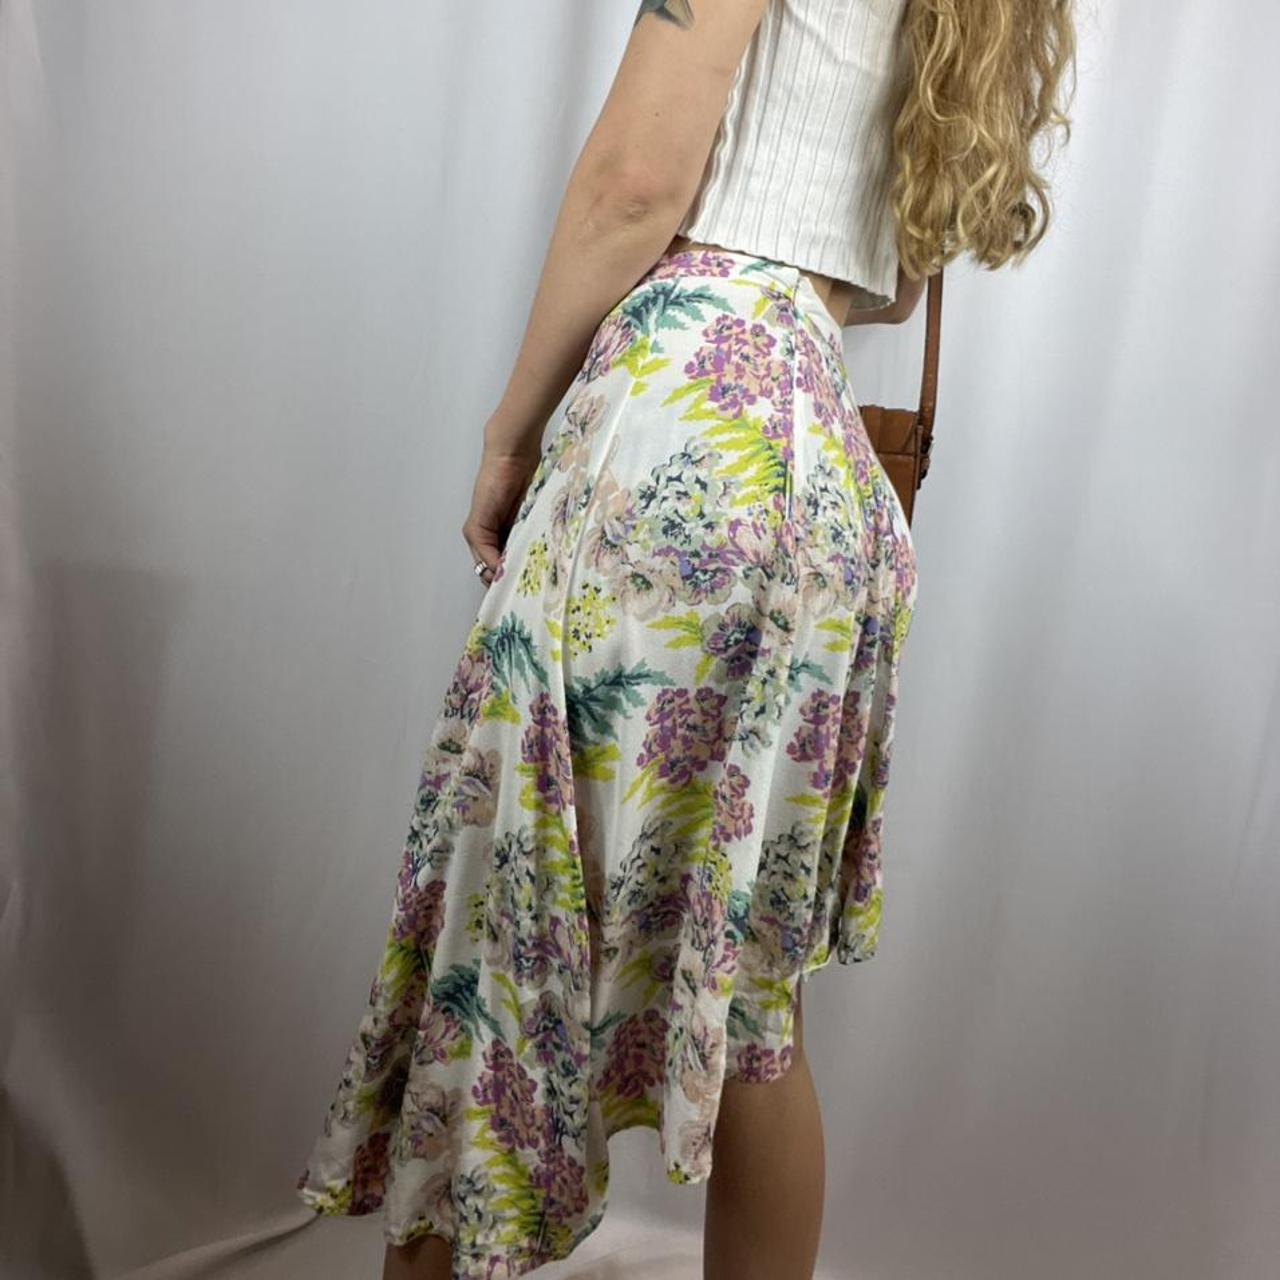 Product Image 4 - Floral skirt 
- Womens 2